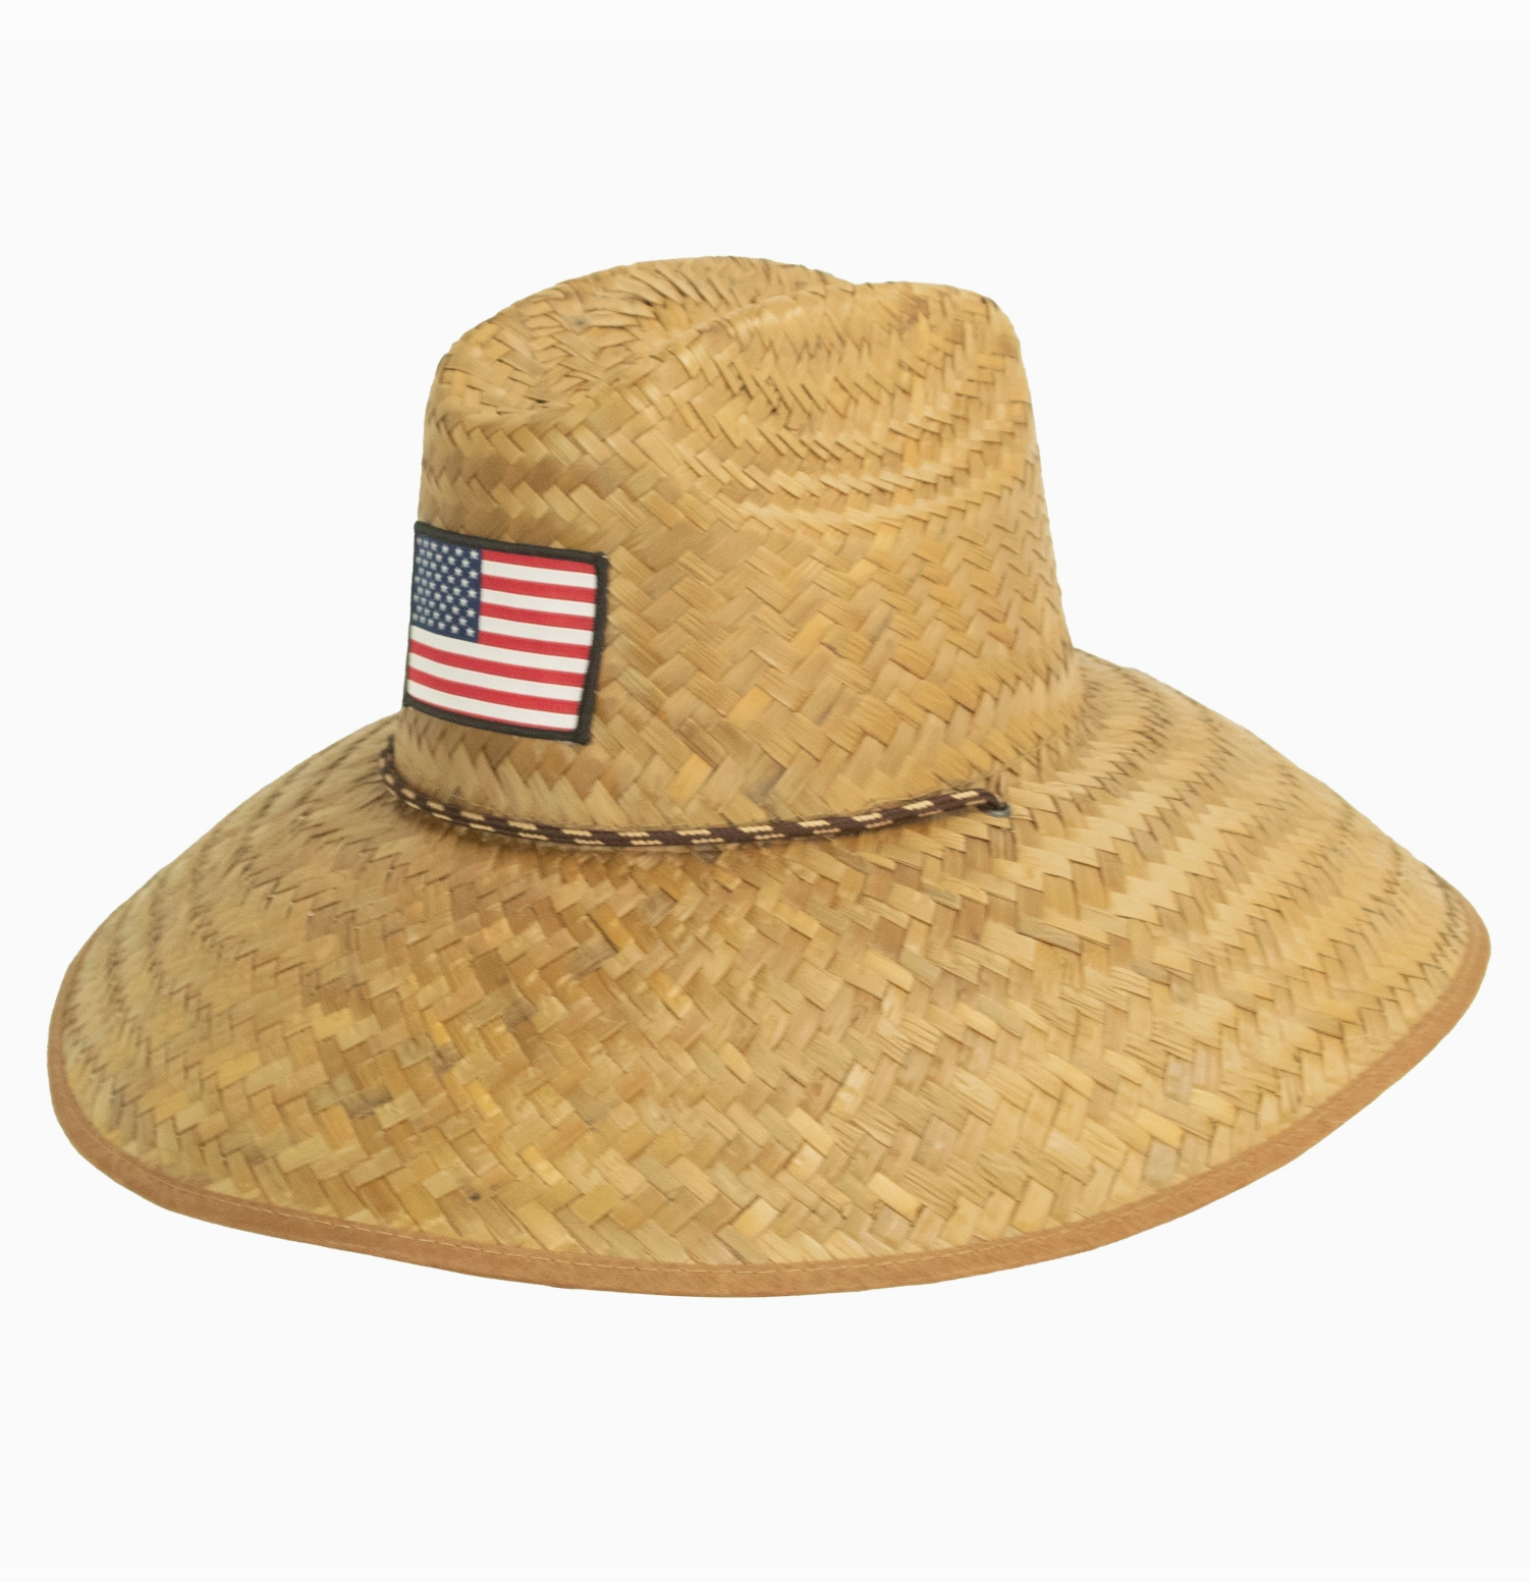 PETER GRIMM CANTON STRAW LIFEGUARD HAT